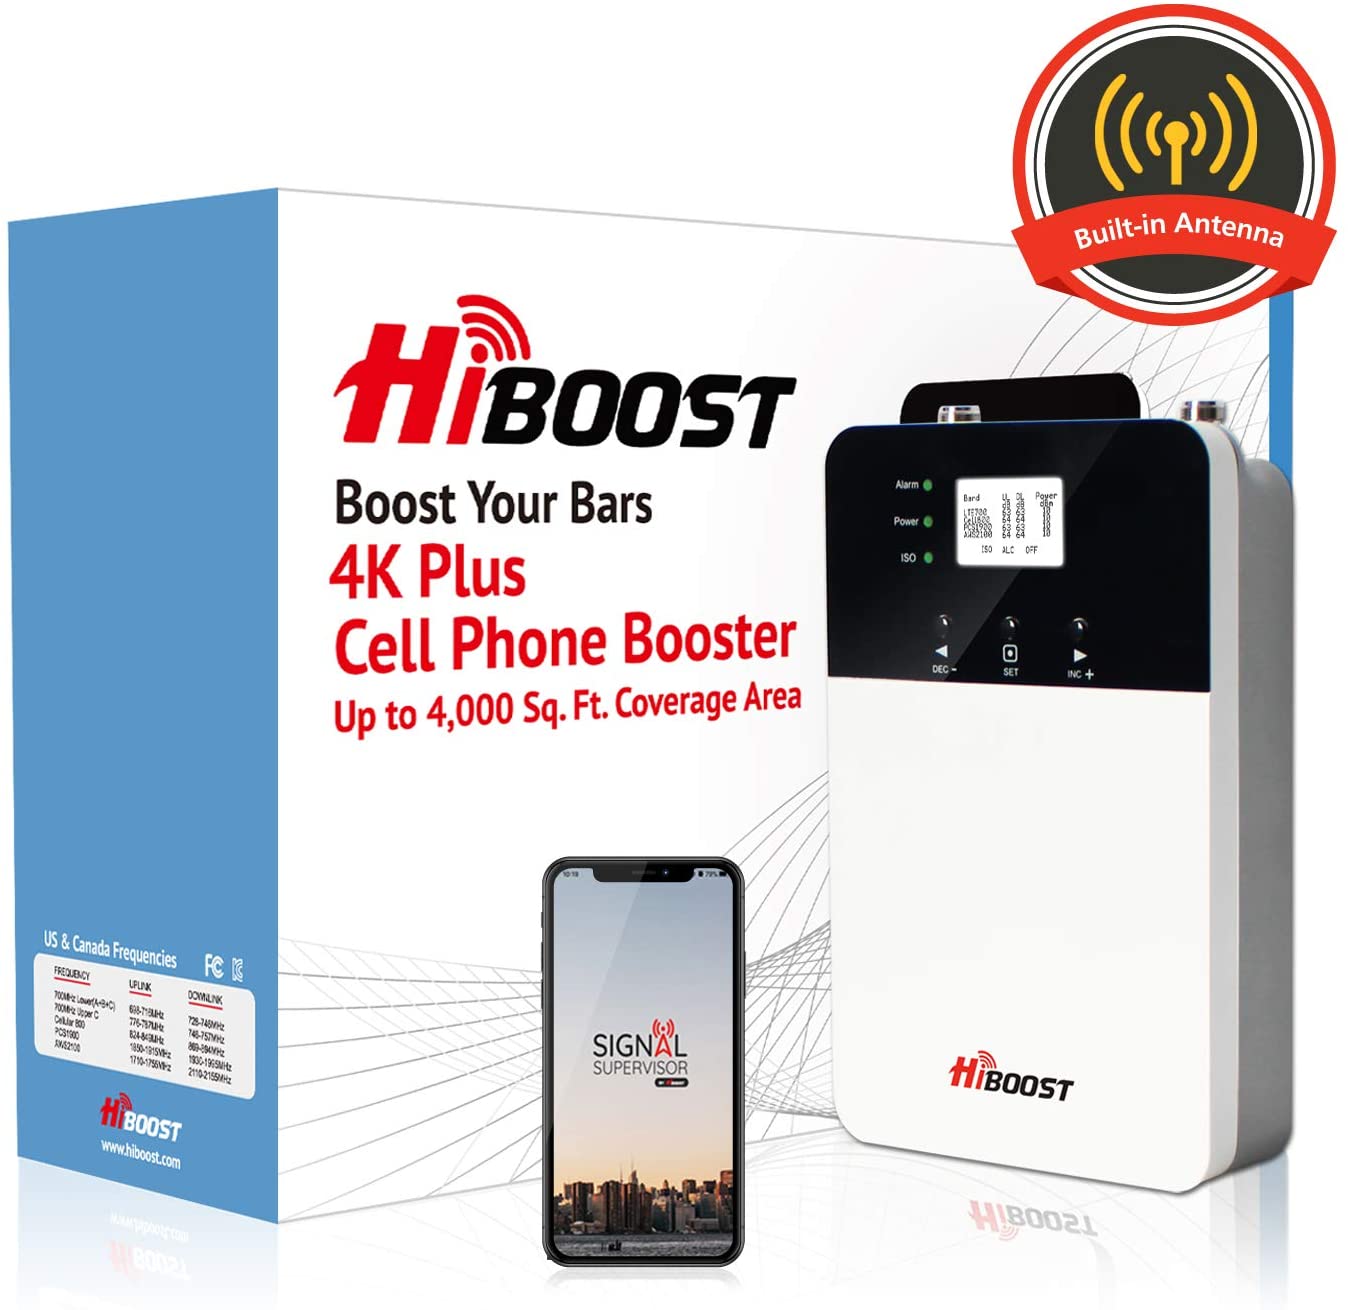 HiBoost 4K Plus Home Cell Phone Signal Booster with Built-in Antenna for Home and Office, Up to 4,000 sq. ft - image 5 of 7